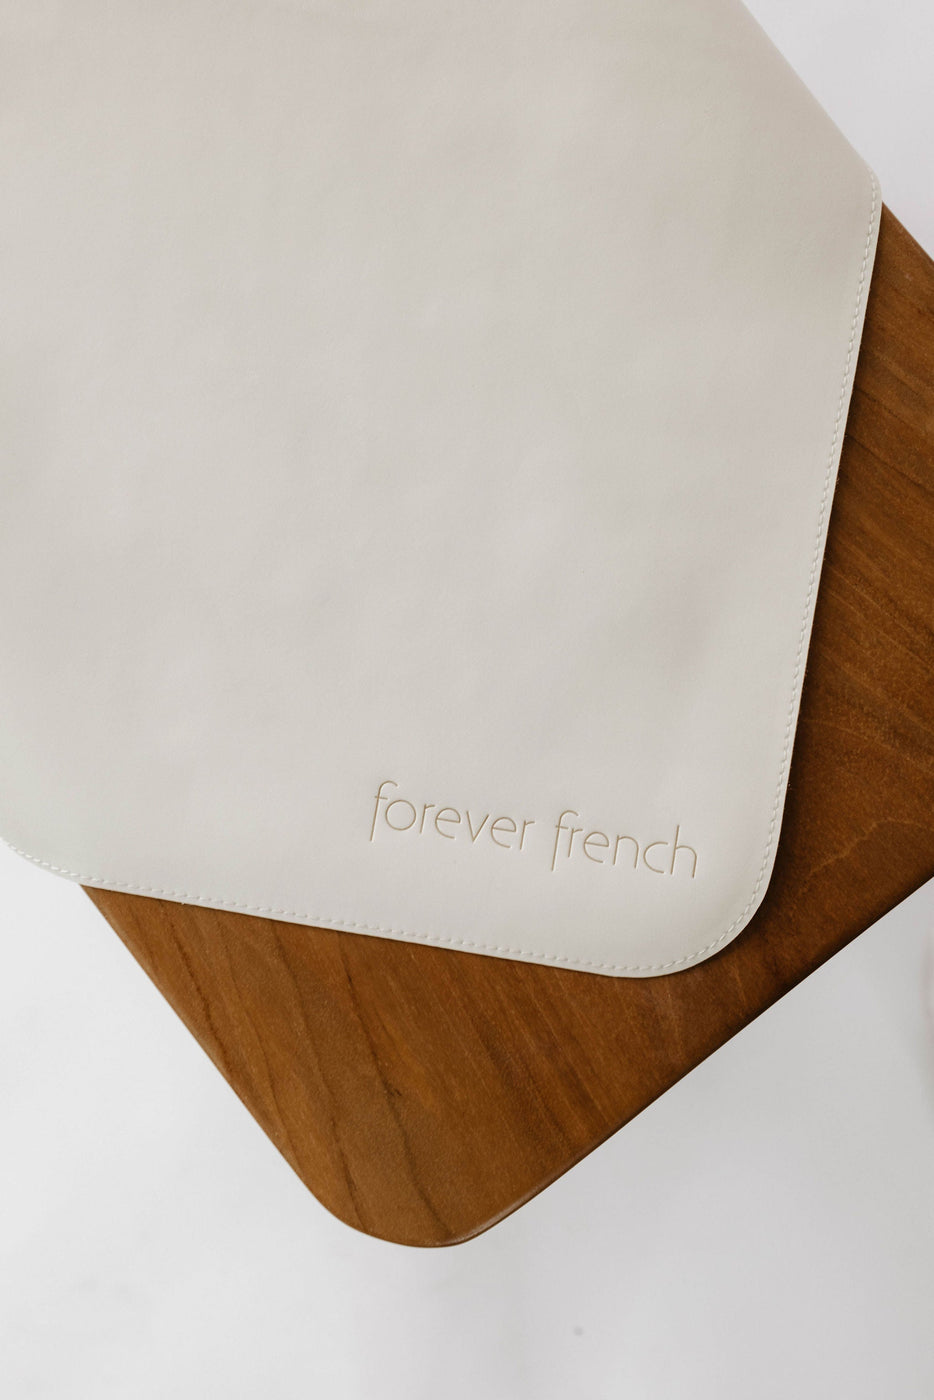 a white place mat on a wood surface